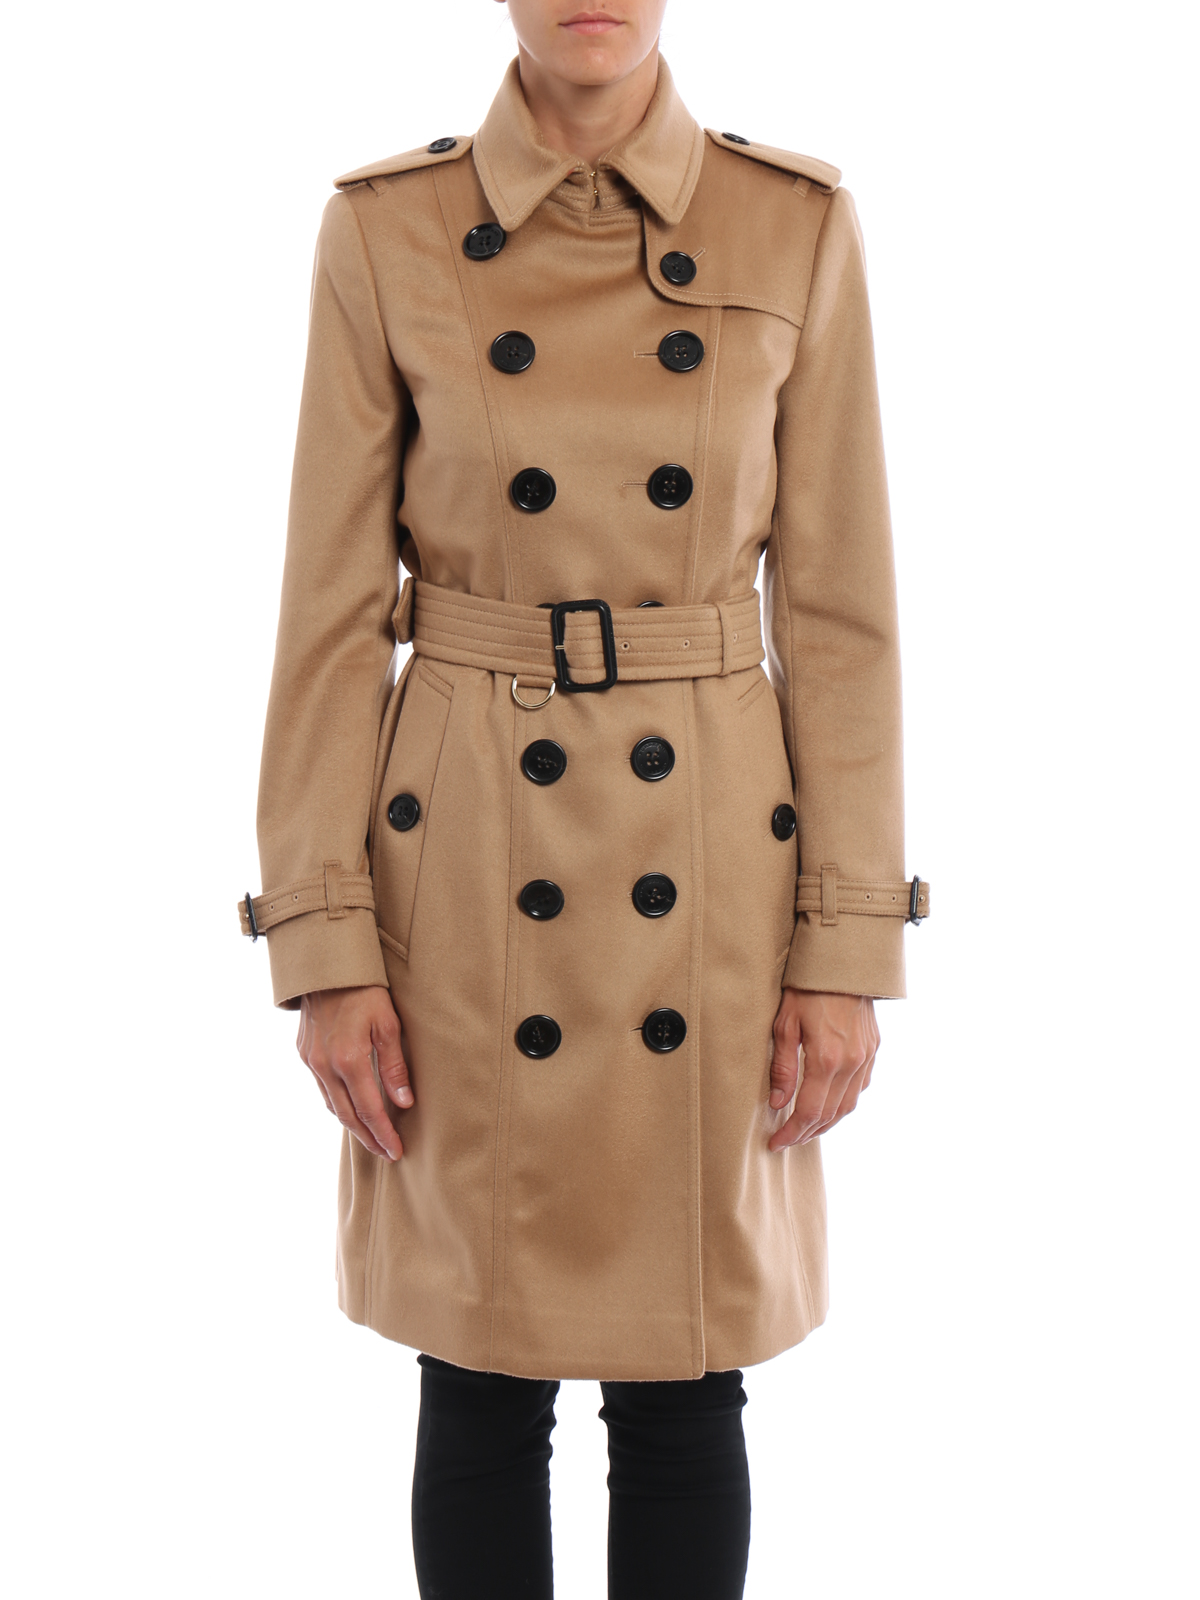 coats Burberry - The Sandringham cashmere trench - 3994455